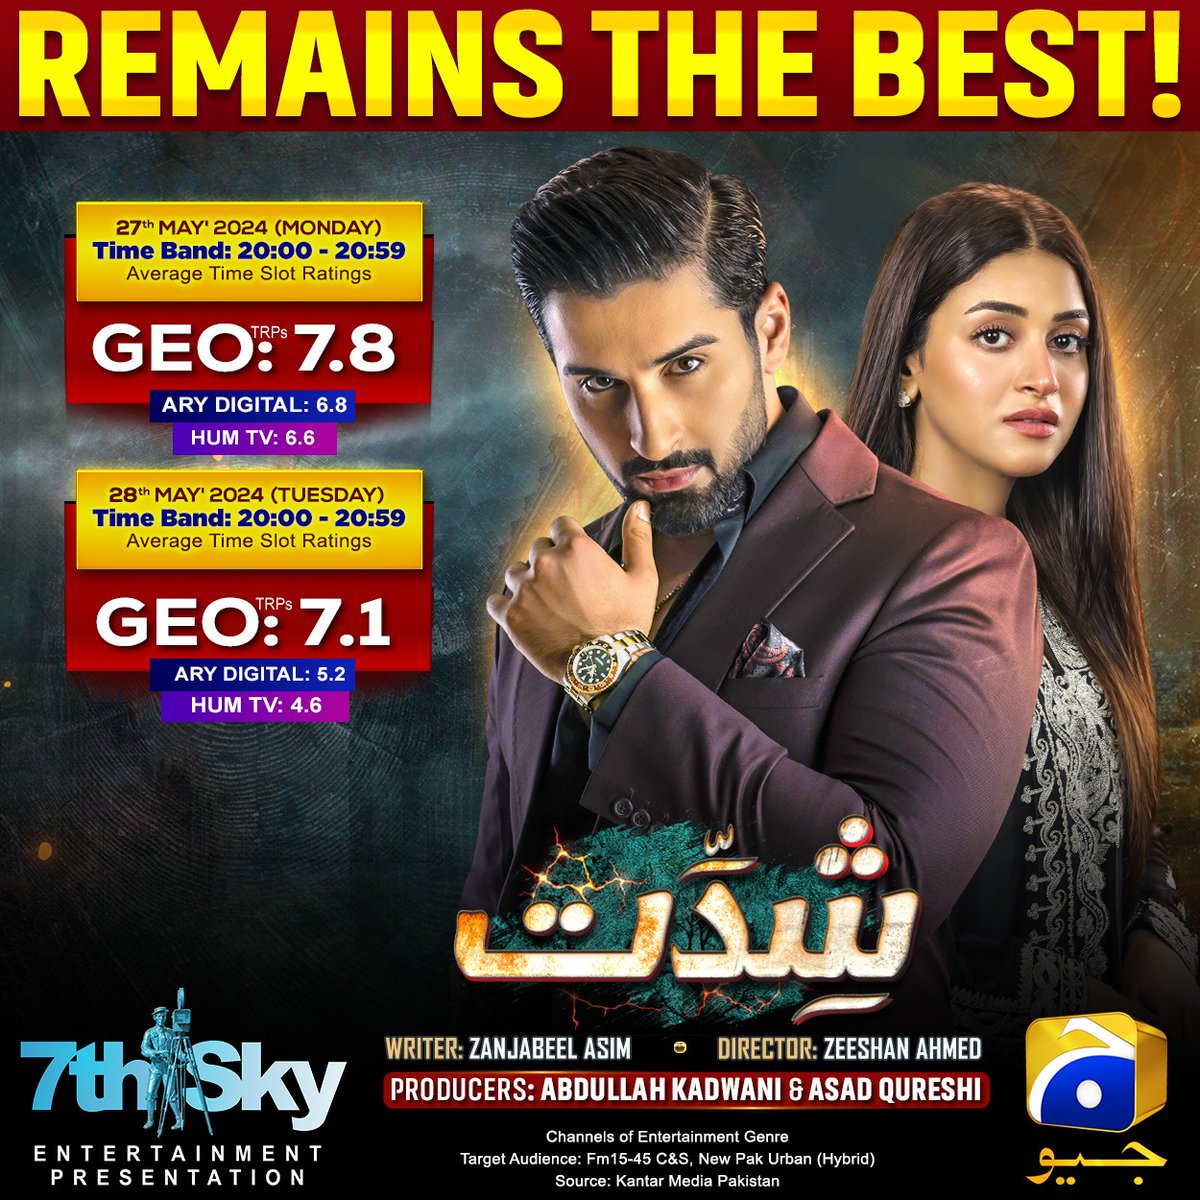 #Shiddat clinches the top position on the ratings charts, garnering exceptional TRPs. Heartfelt gratitude to our viewers for their incredible support! 📷

#GeoEntertainment #HarPalGeo #GeoTV #7thSkyEntertainment #AbdullahKadwani #AsadQureshi #ZanjabeelAsim #ZeeshanAhmed